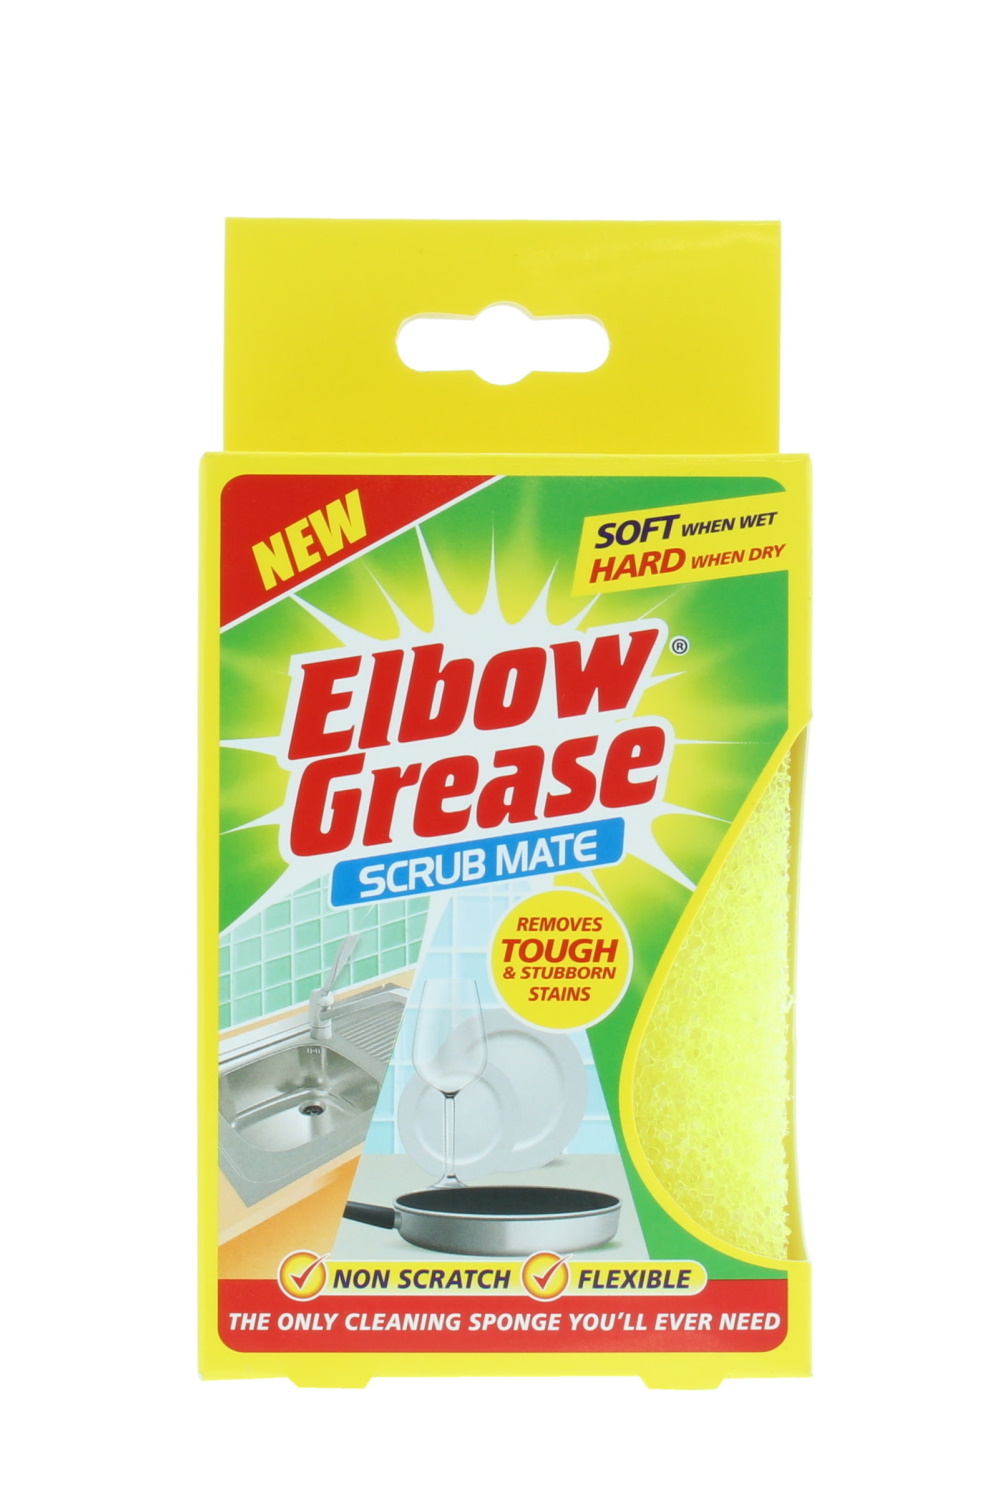 Elbow Grease Scrub Mate – fullyscrubbed.com